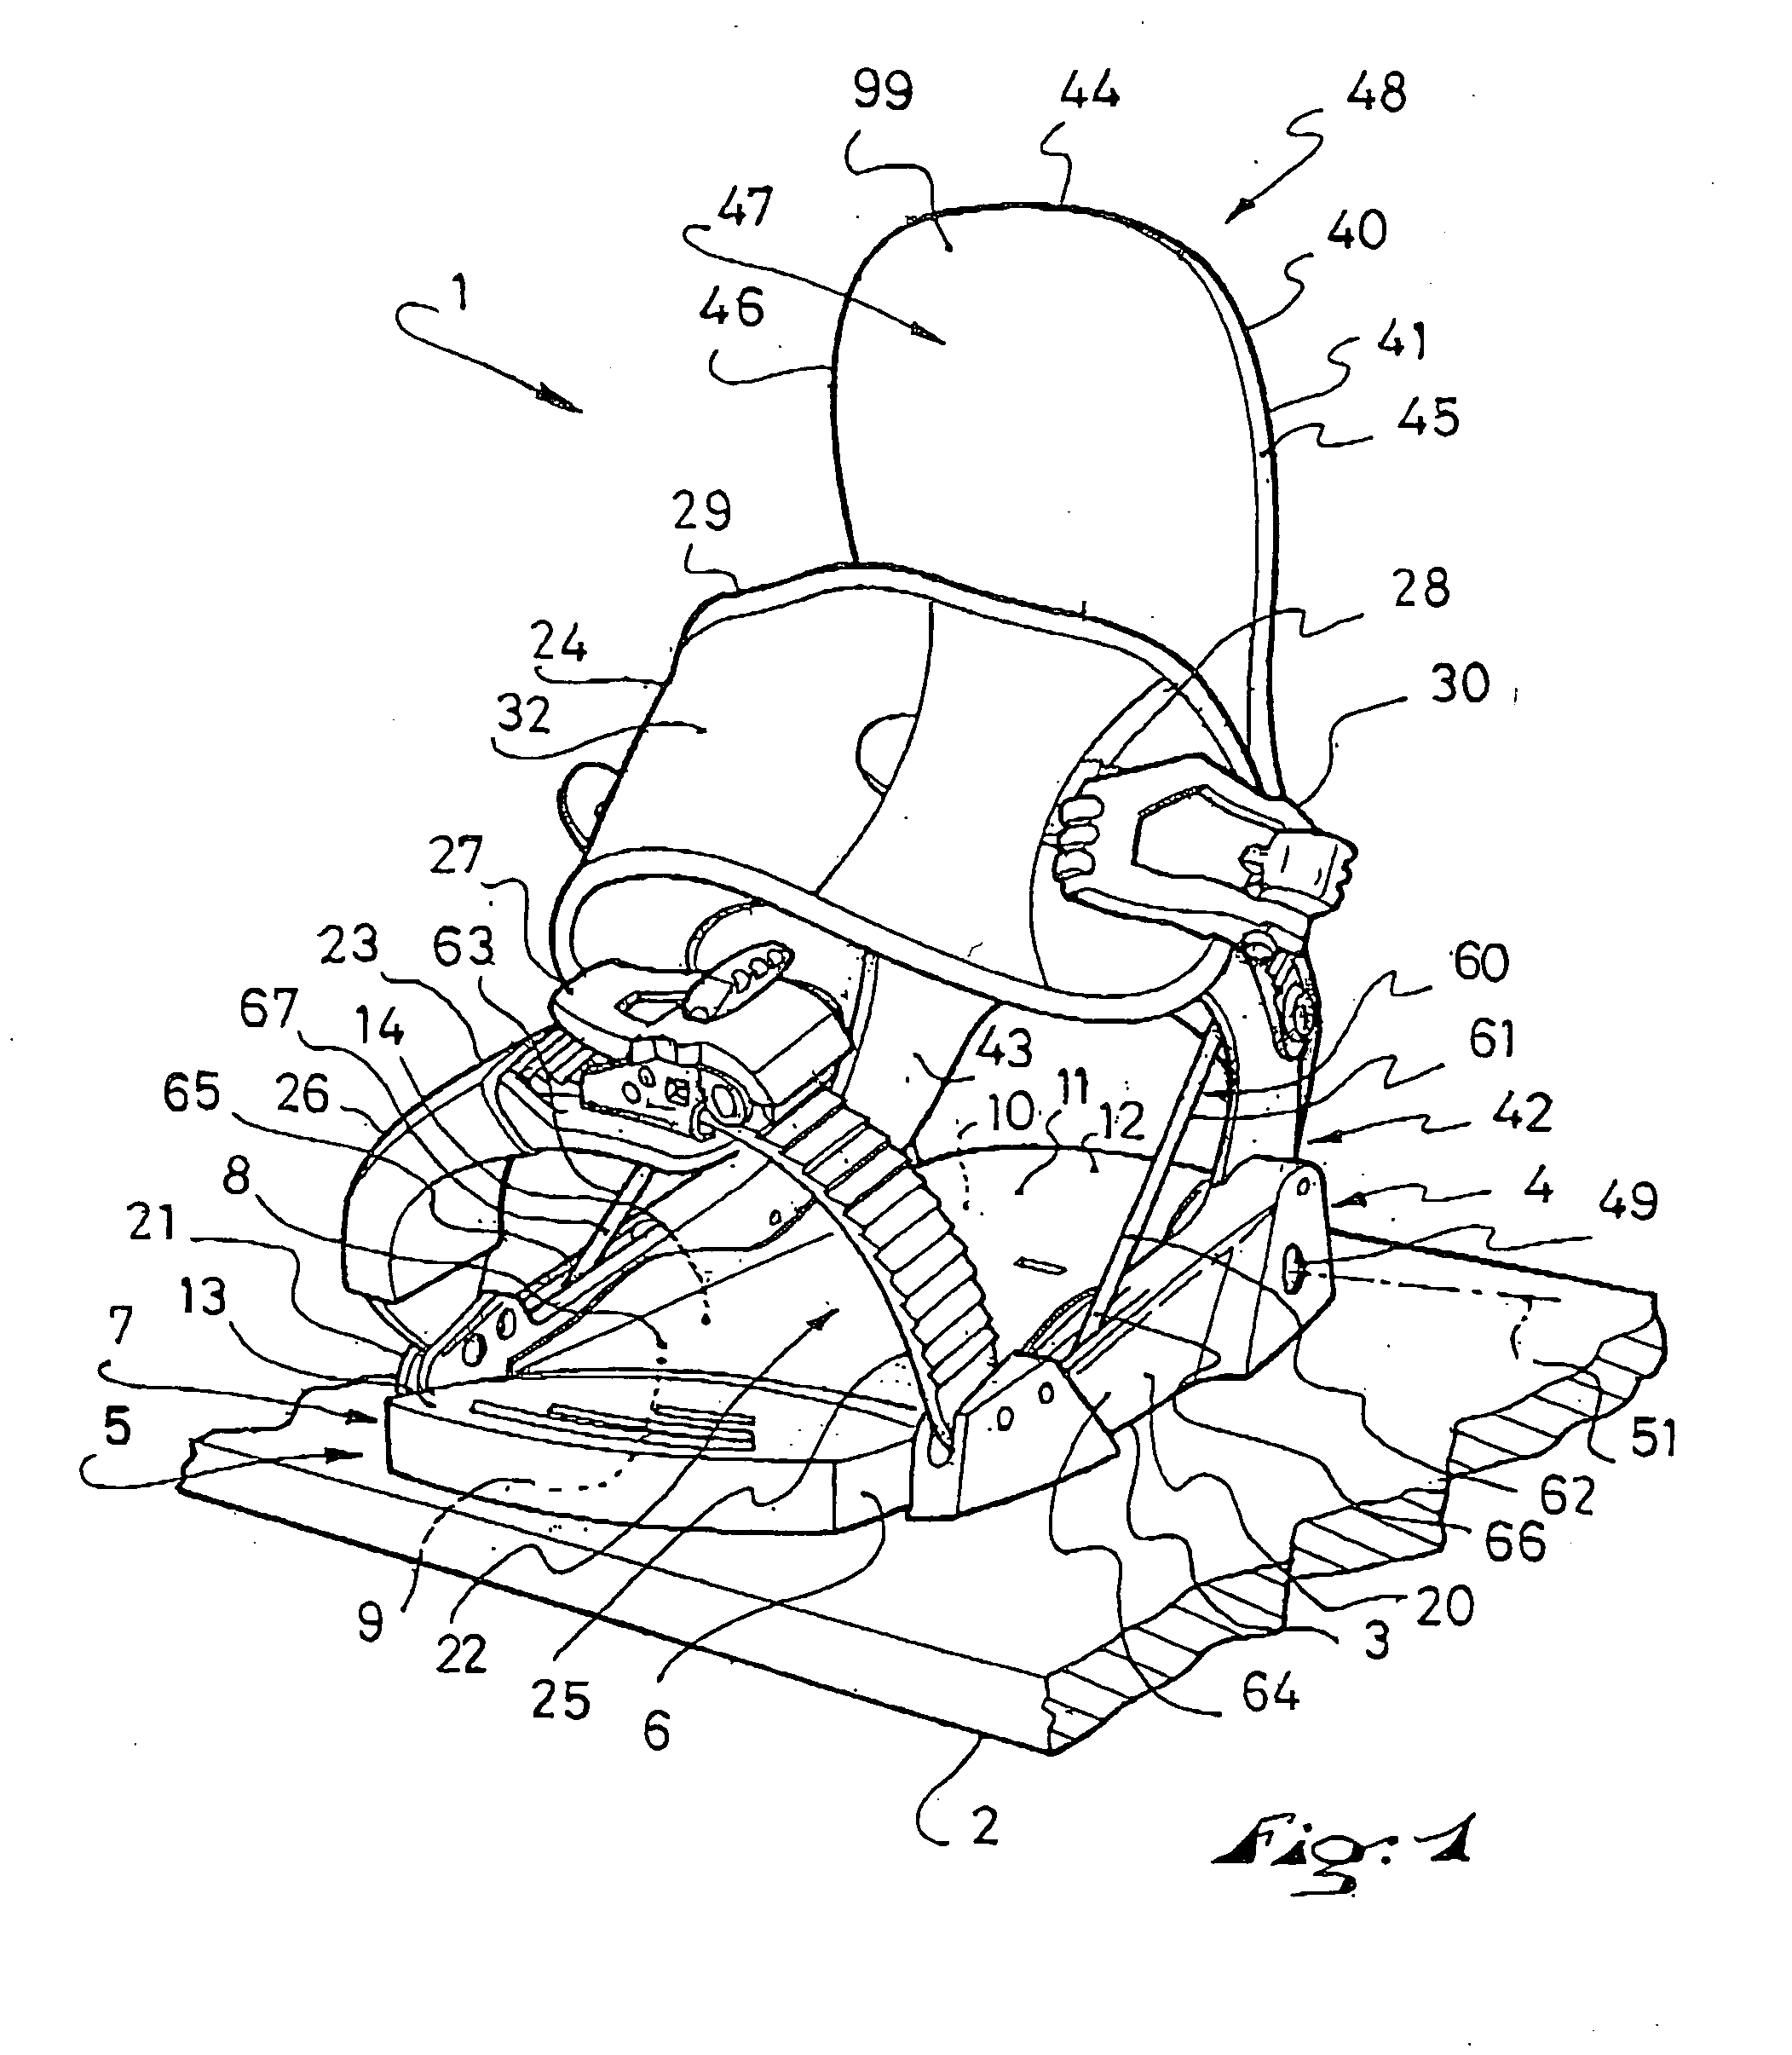 Device for retaining a foot or a boot on a sports apparatus